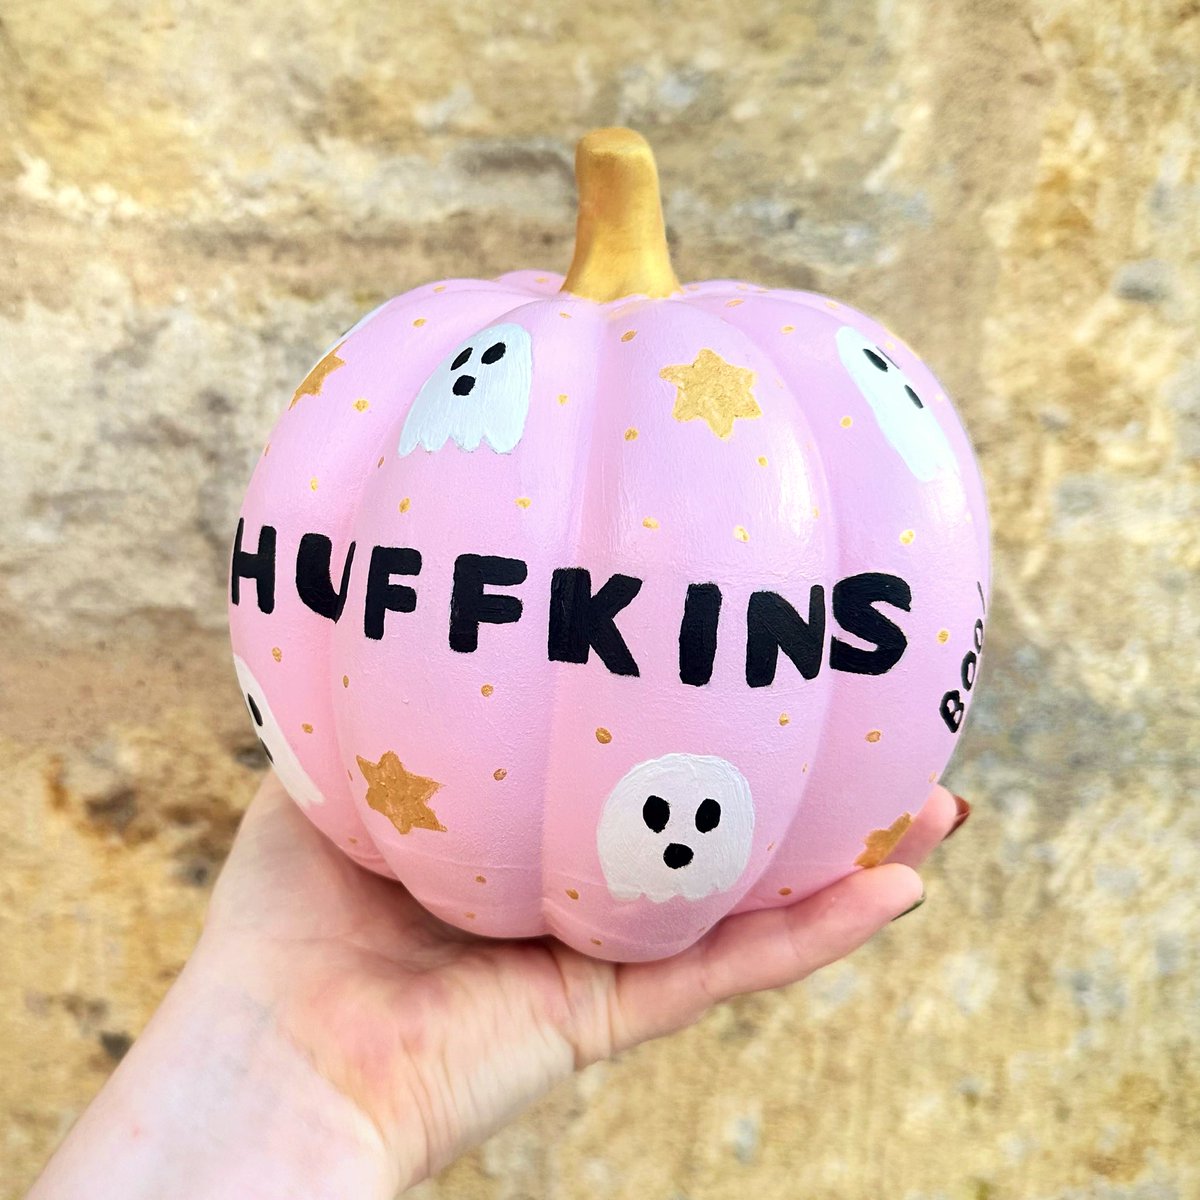 Happy Halloween! 🎃 No tricks… only treats here at Huffkins 👻